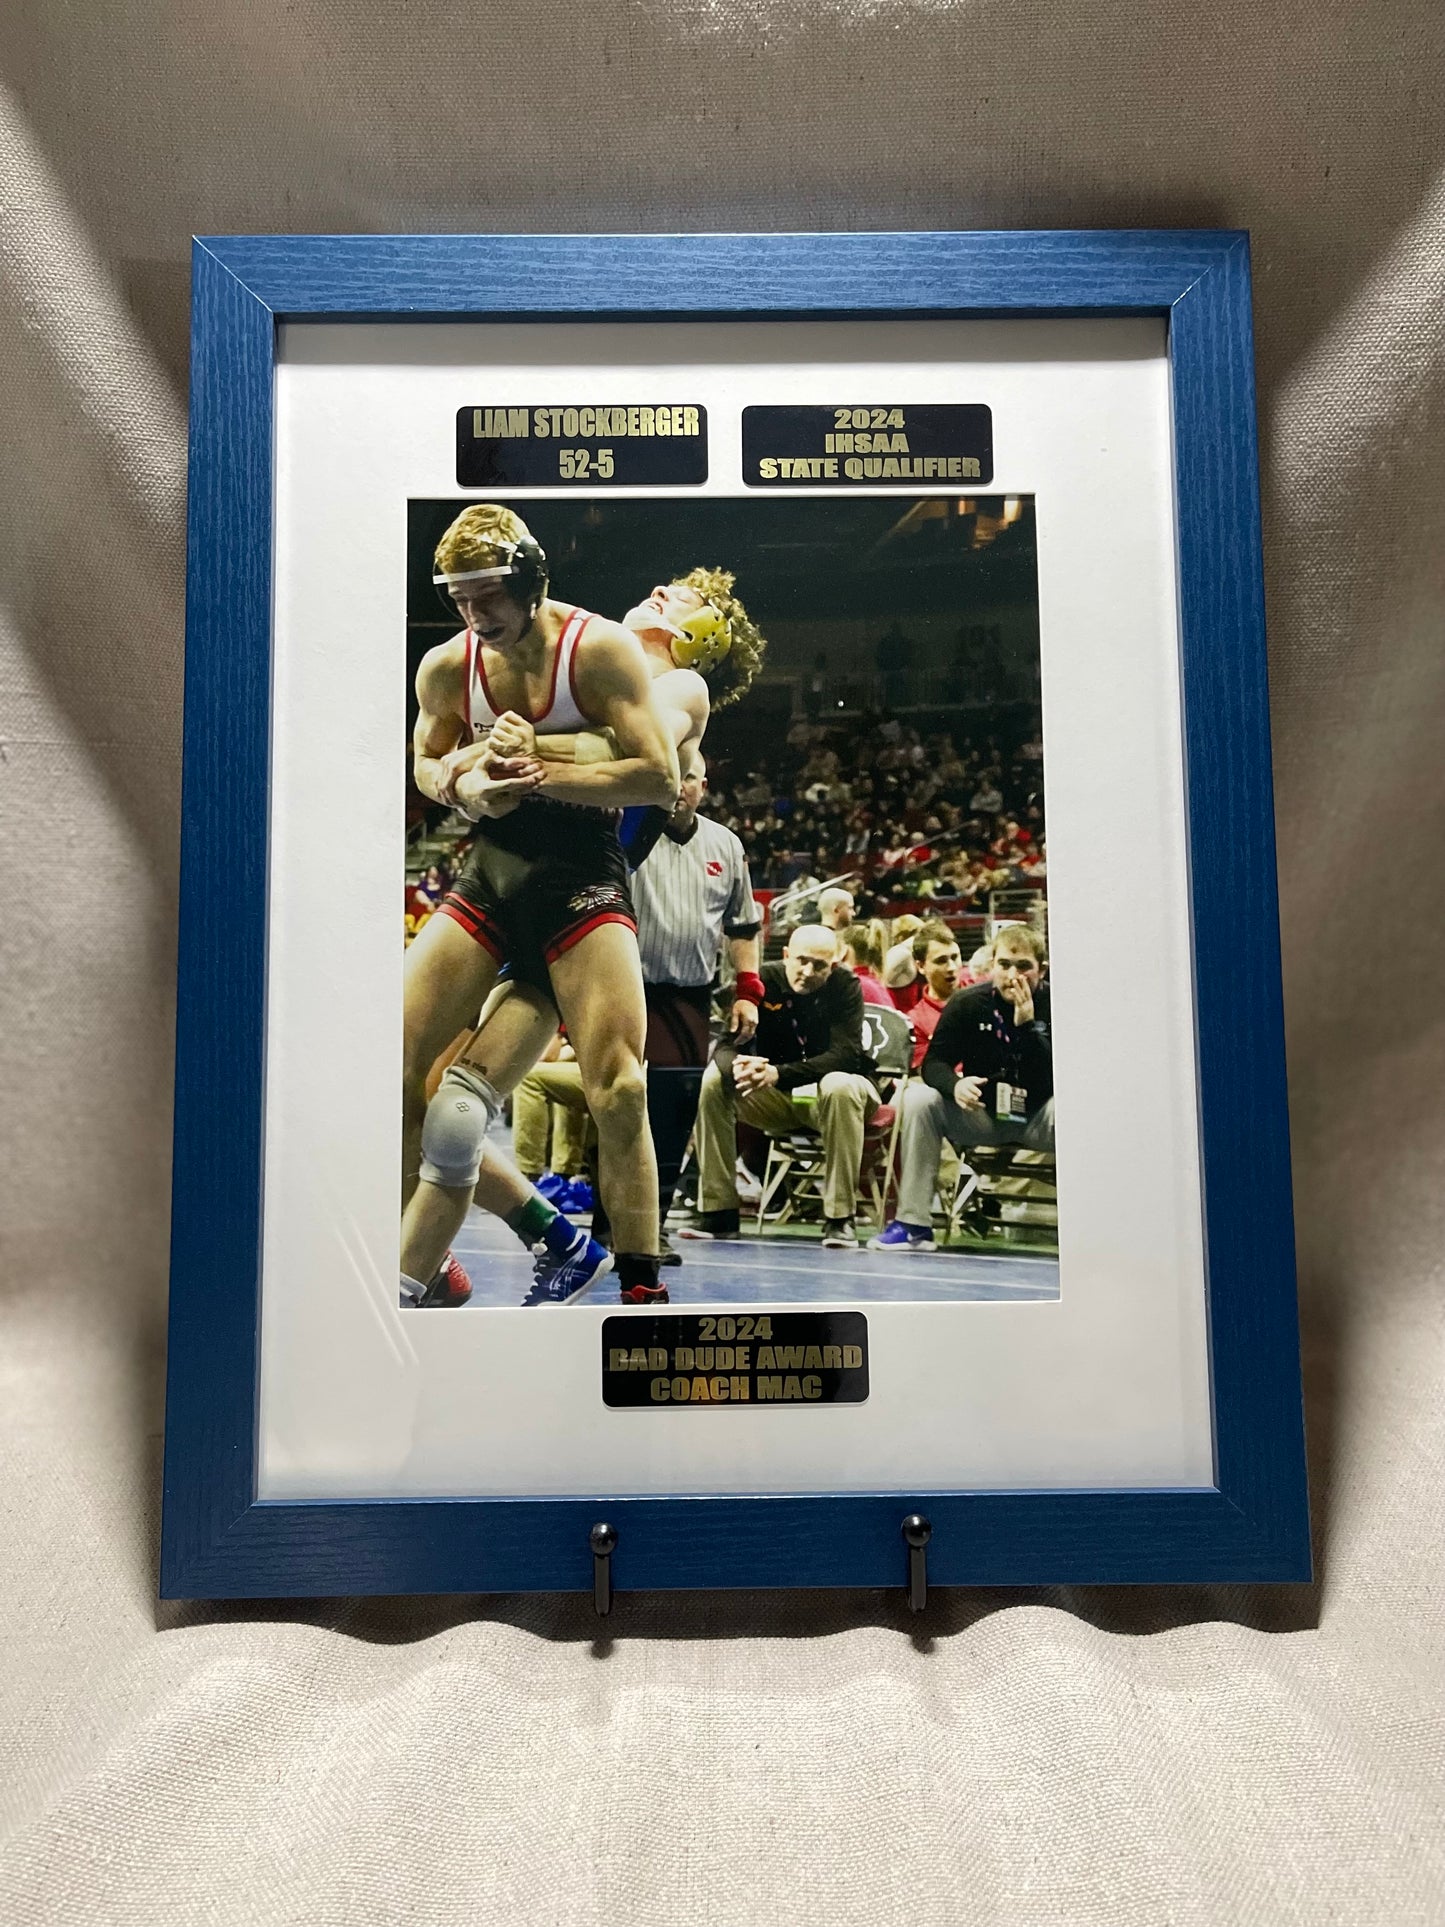 Sports Award Picture Frame 11x14 Photo Plaque Personalized Engraved Matted